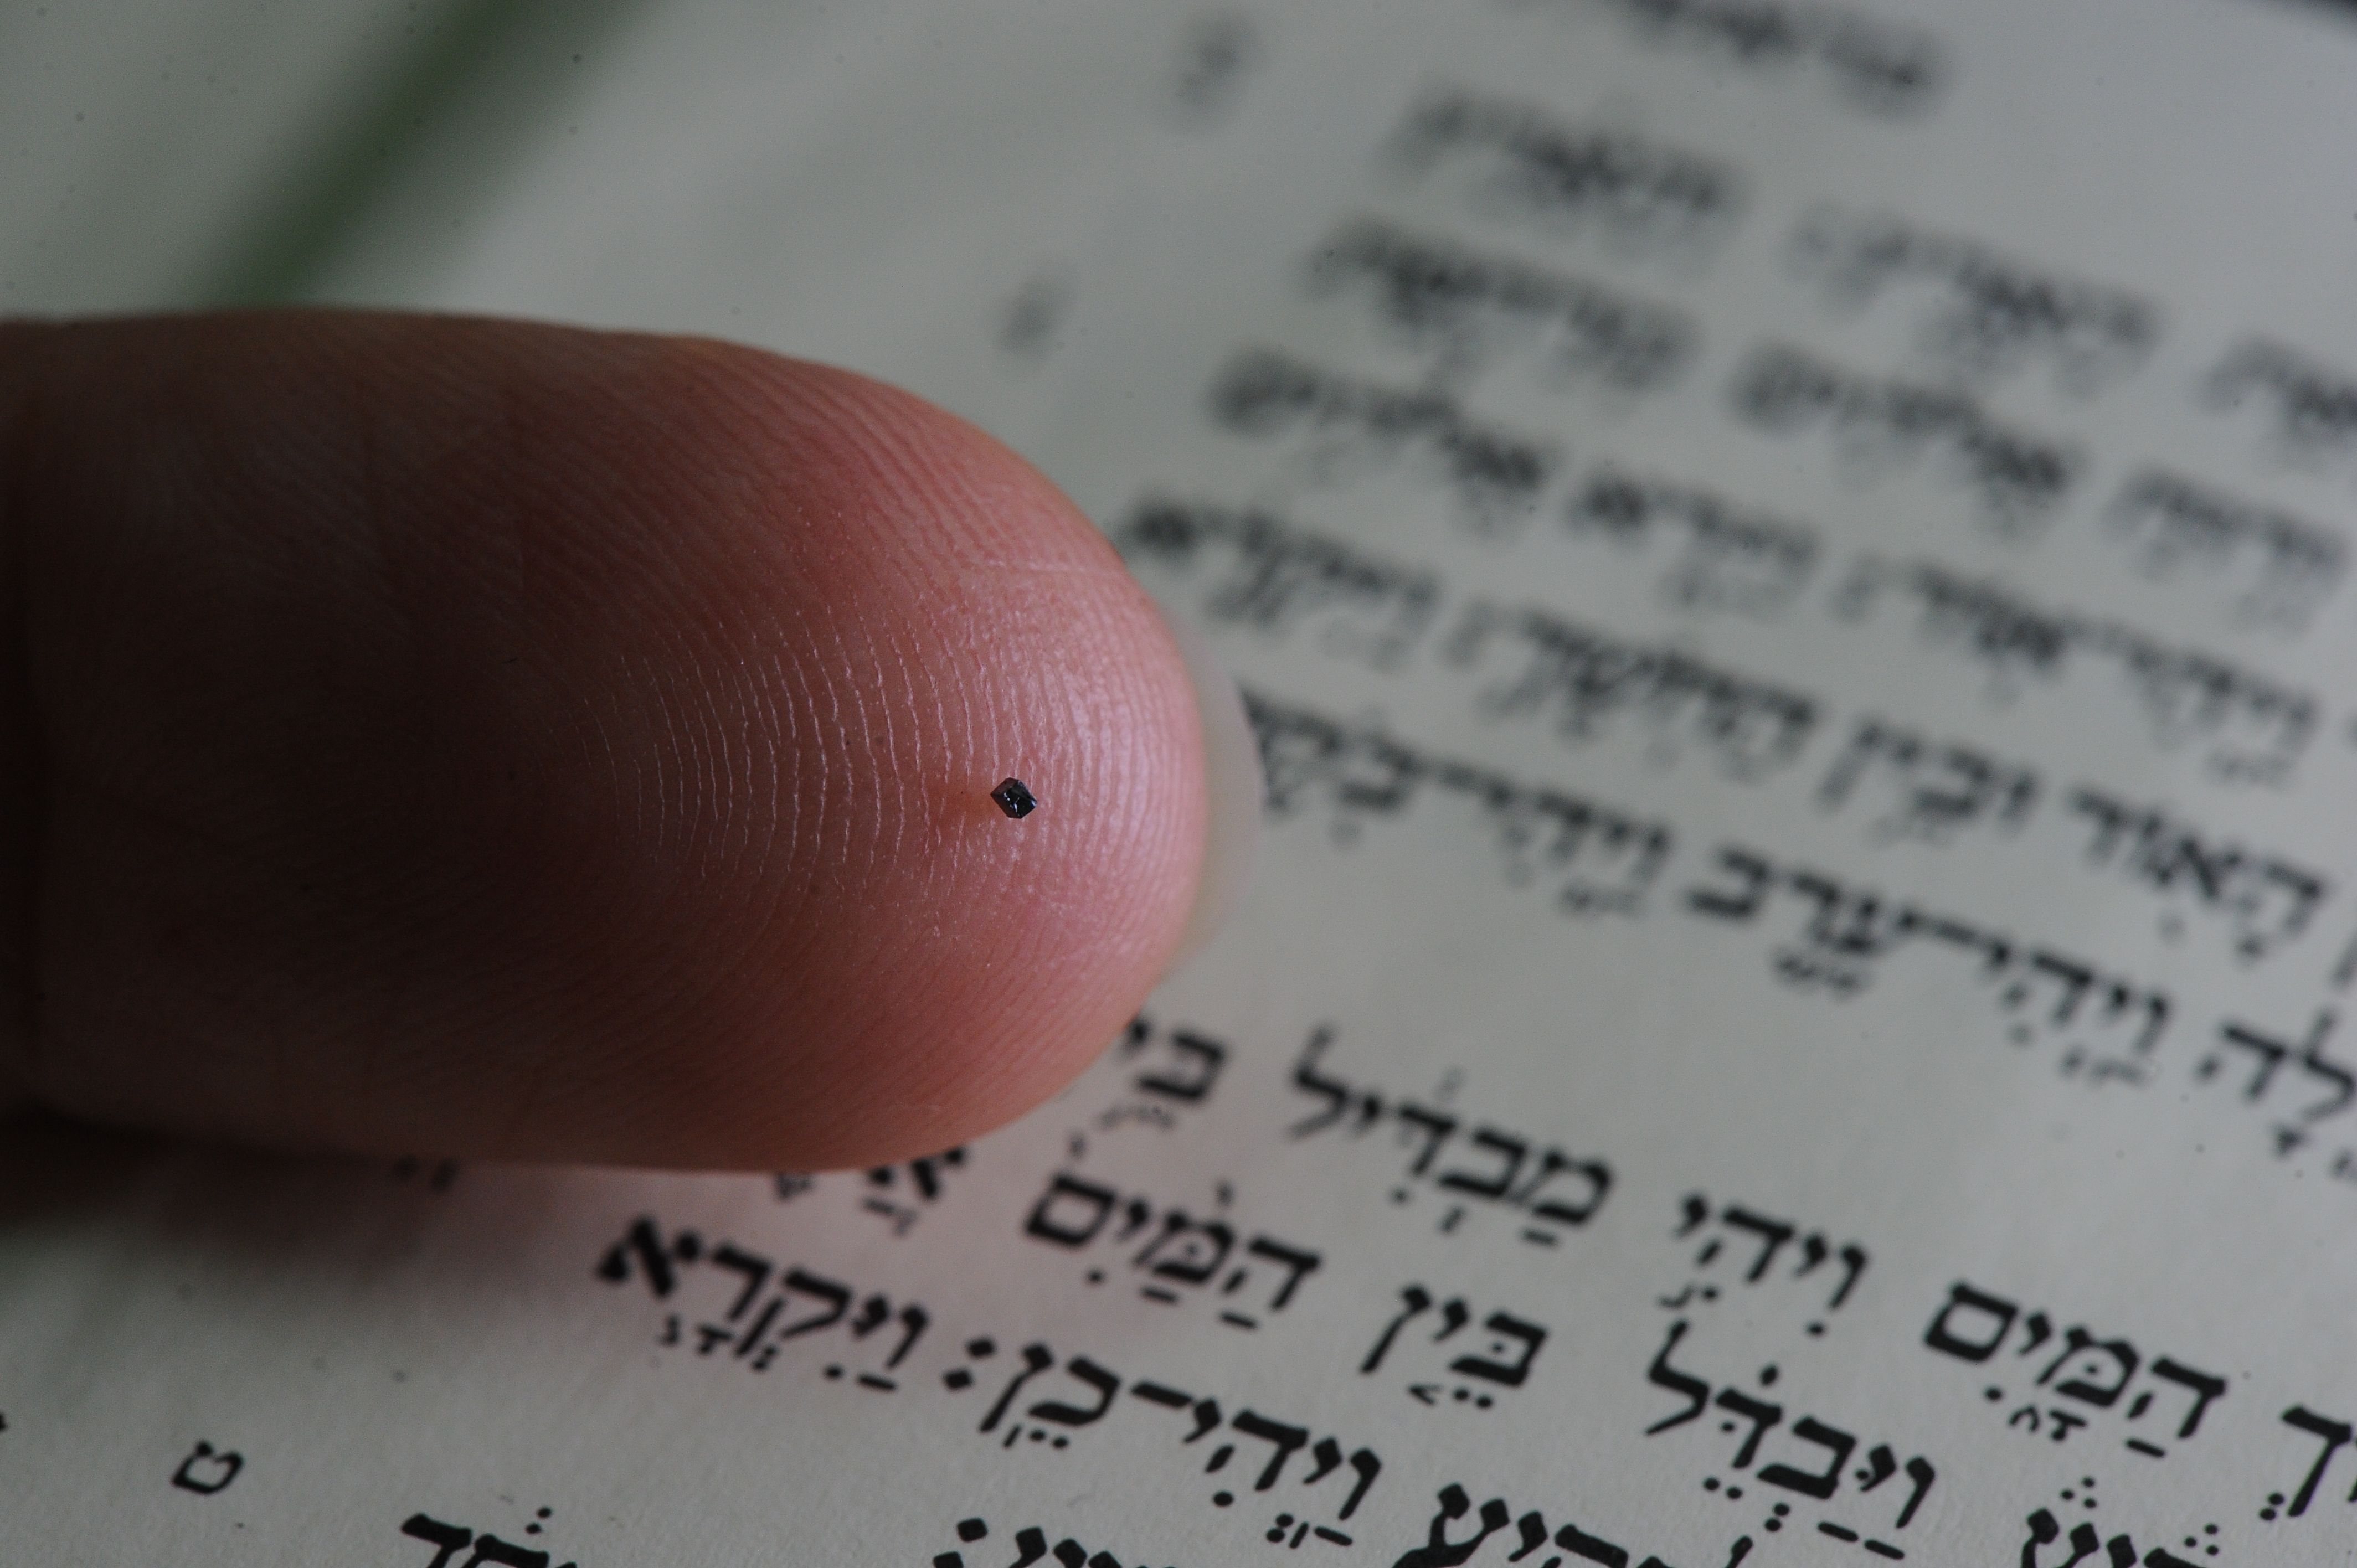 World's smallest Bible would fit on the tip of a pen